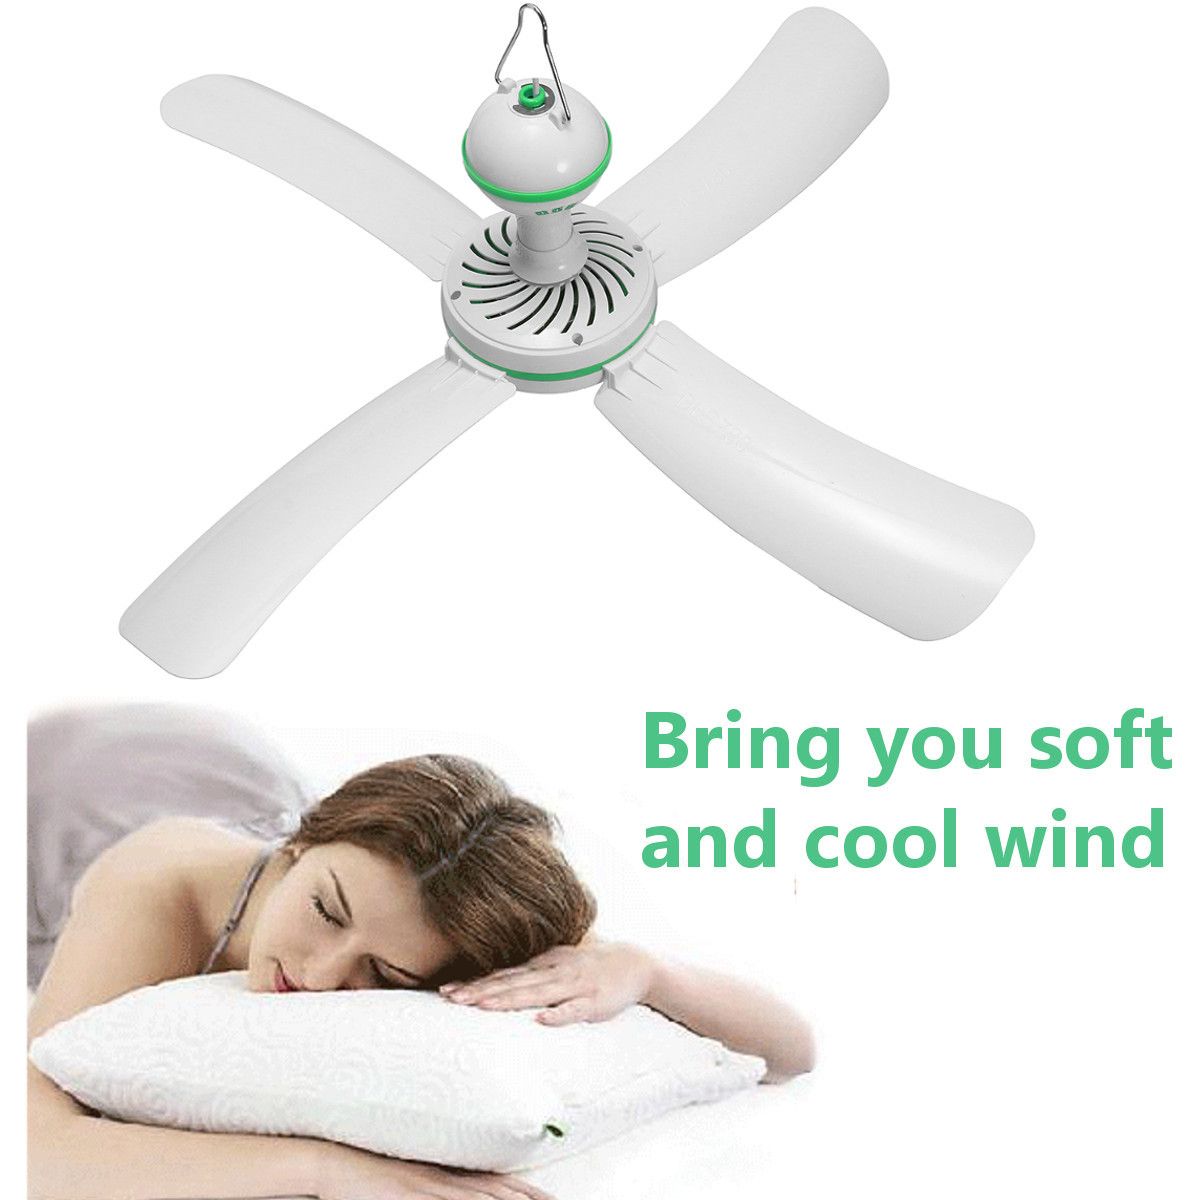 220V-20W-4-Blade-Mini-Ceiling-Fan-Indoor-Hanging-Summer-Cooler-Gift-With-15m-Cable-1457315